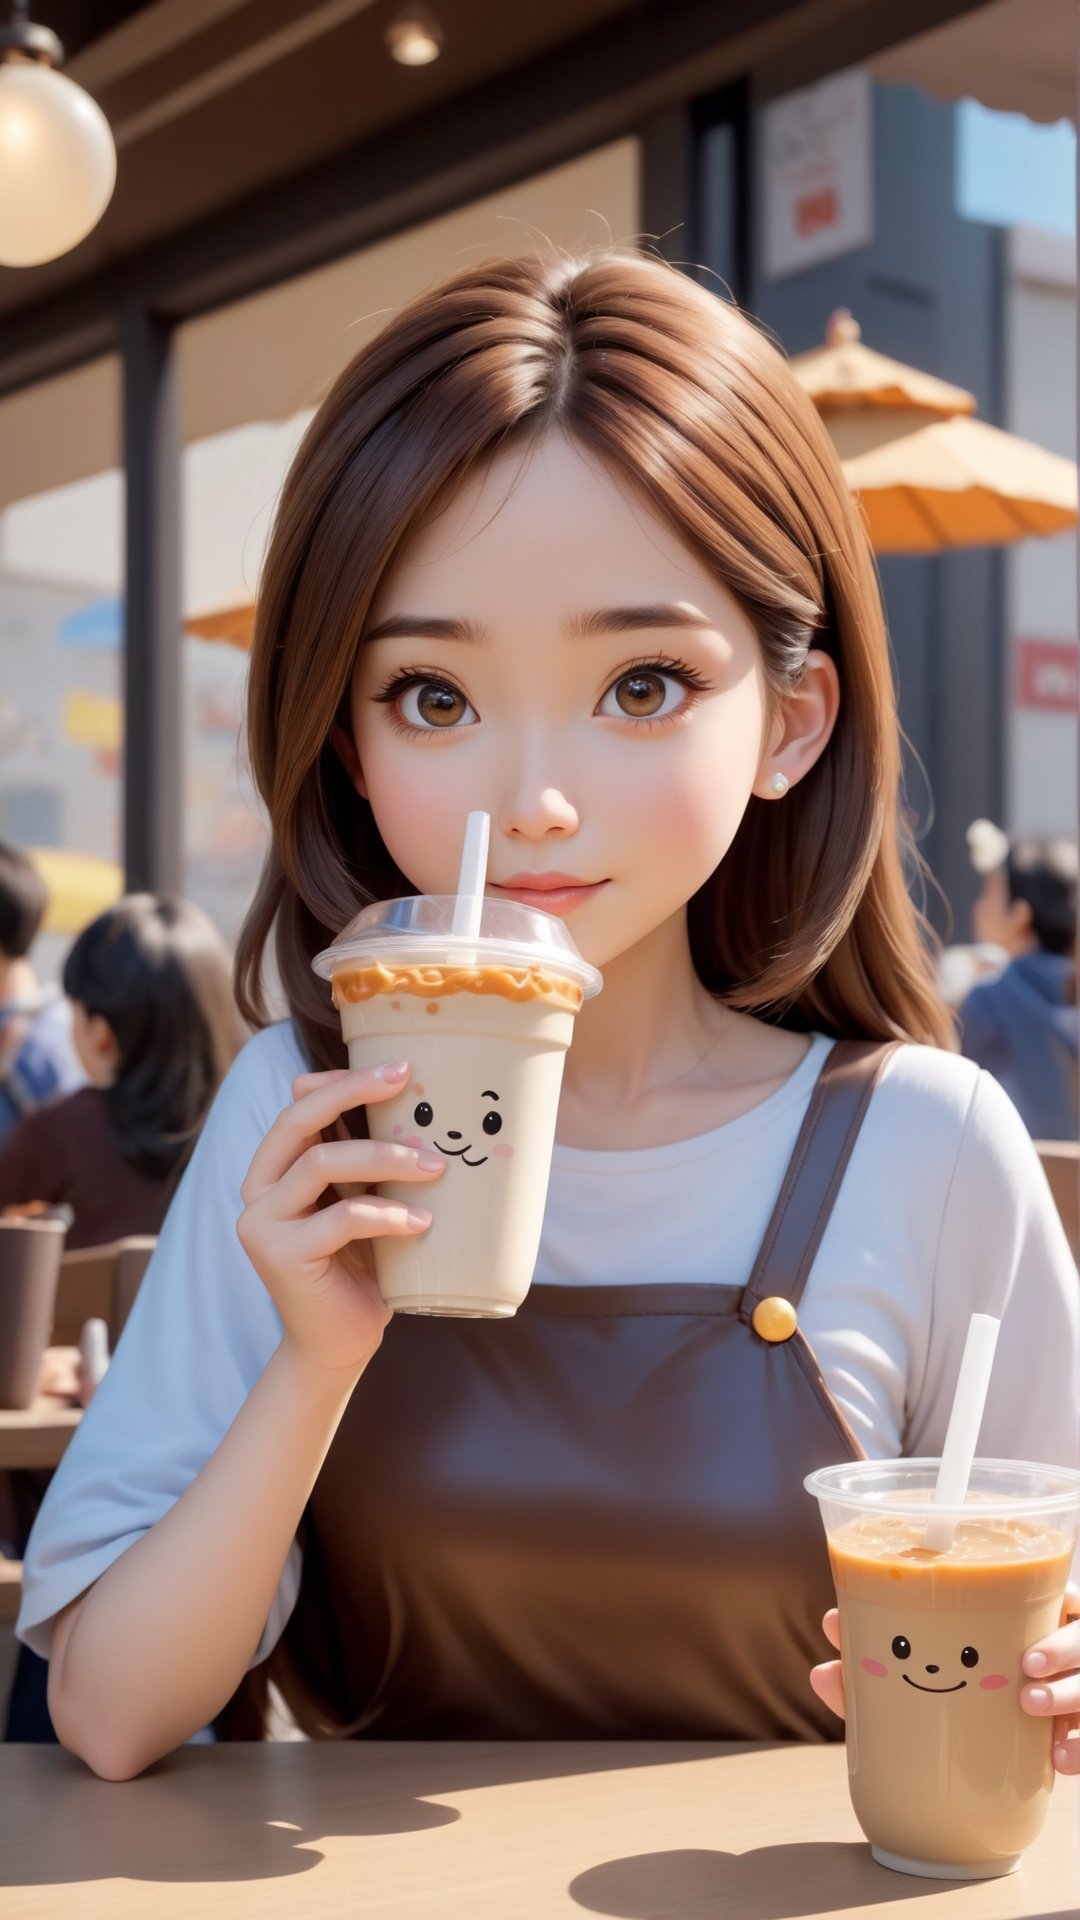 Pixar anime movie scene style, Disney anime scene style, an anime girl drinking Pearl milk tea at a table, in the style of realistic images, childlike, realistic lifelike figures, he Jiaying, white and brown, cute and colorful, shiny/glossy, Realistic photograph, high quality, portrait photograph